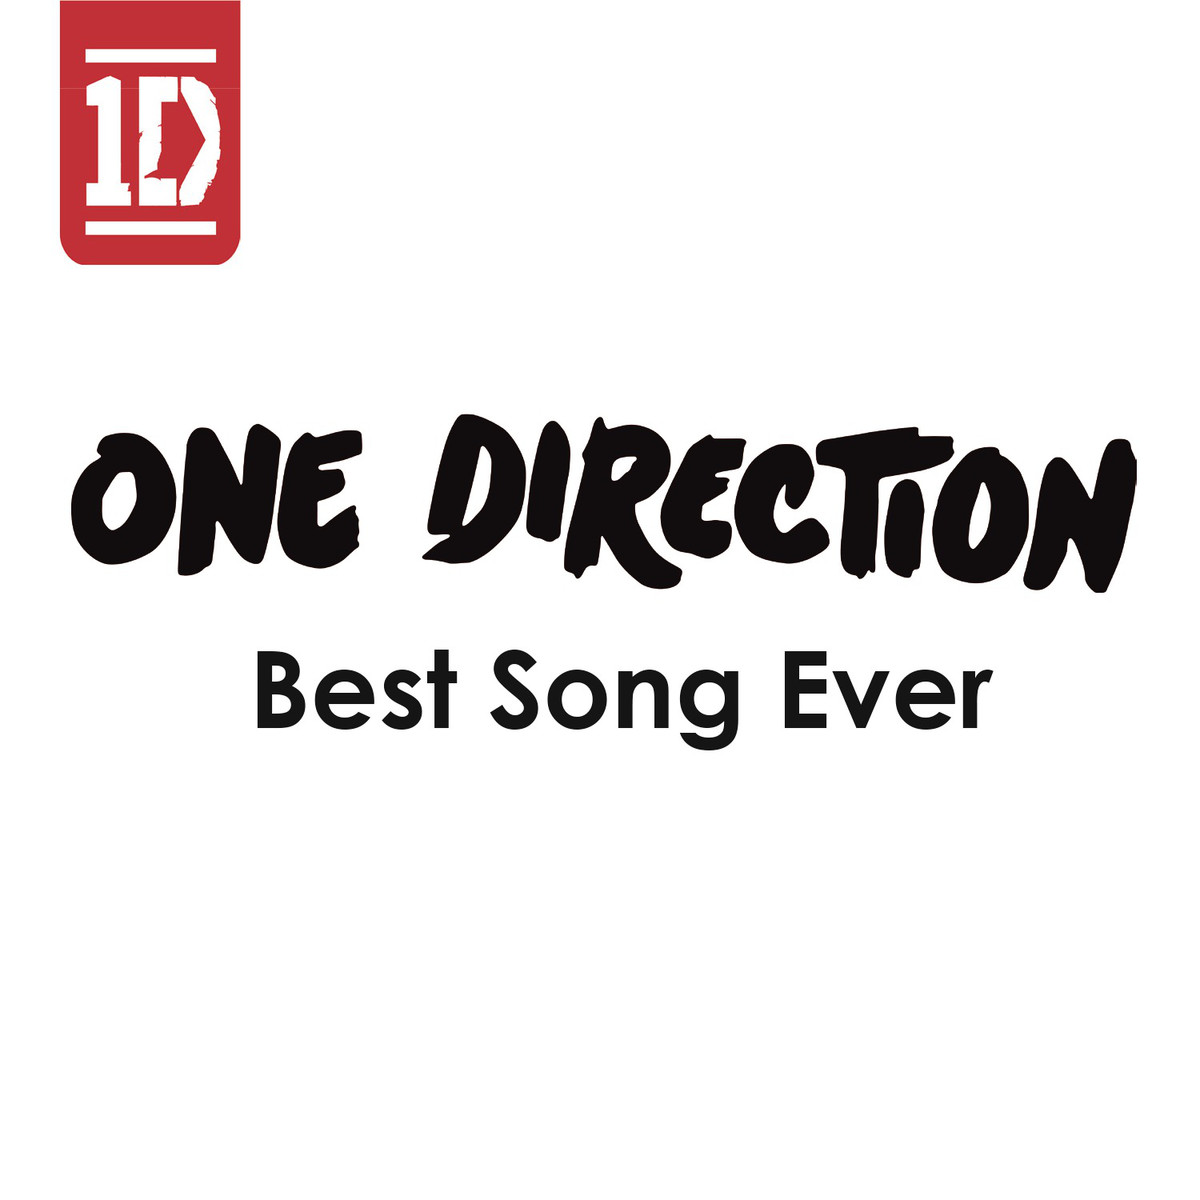 We good song. Best Song ever. Best one. Картинки де Бест. Song better better.